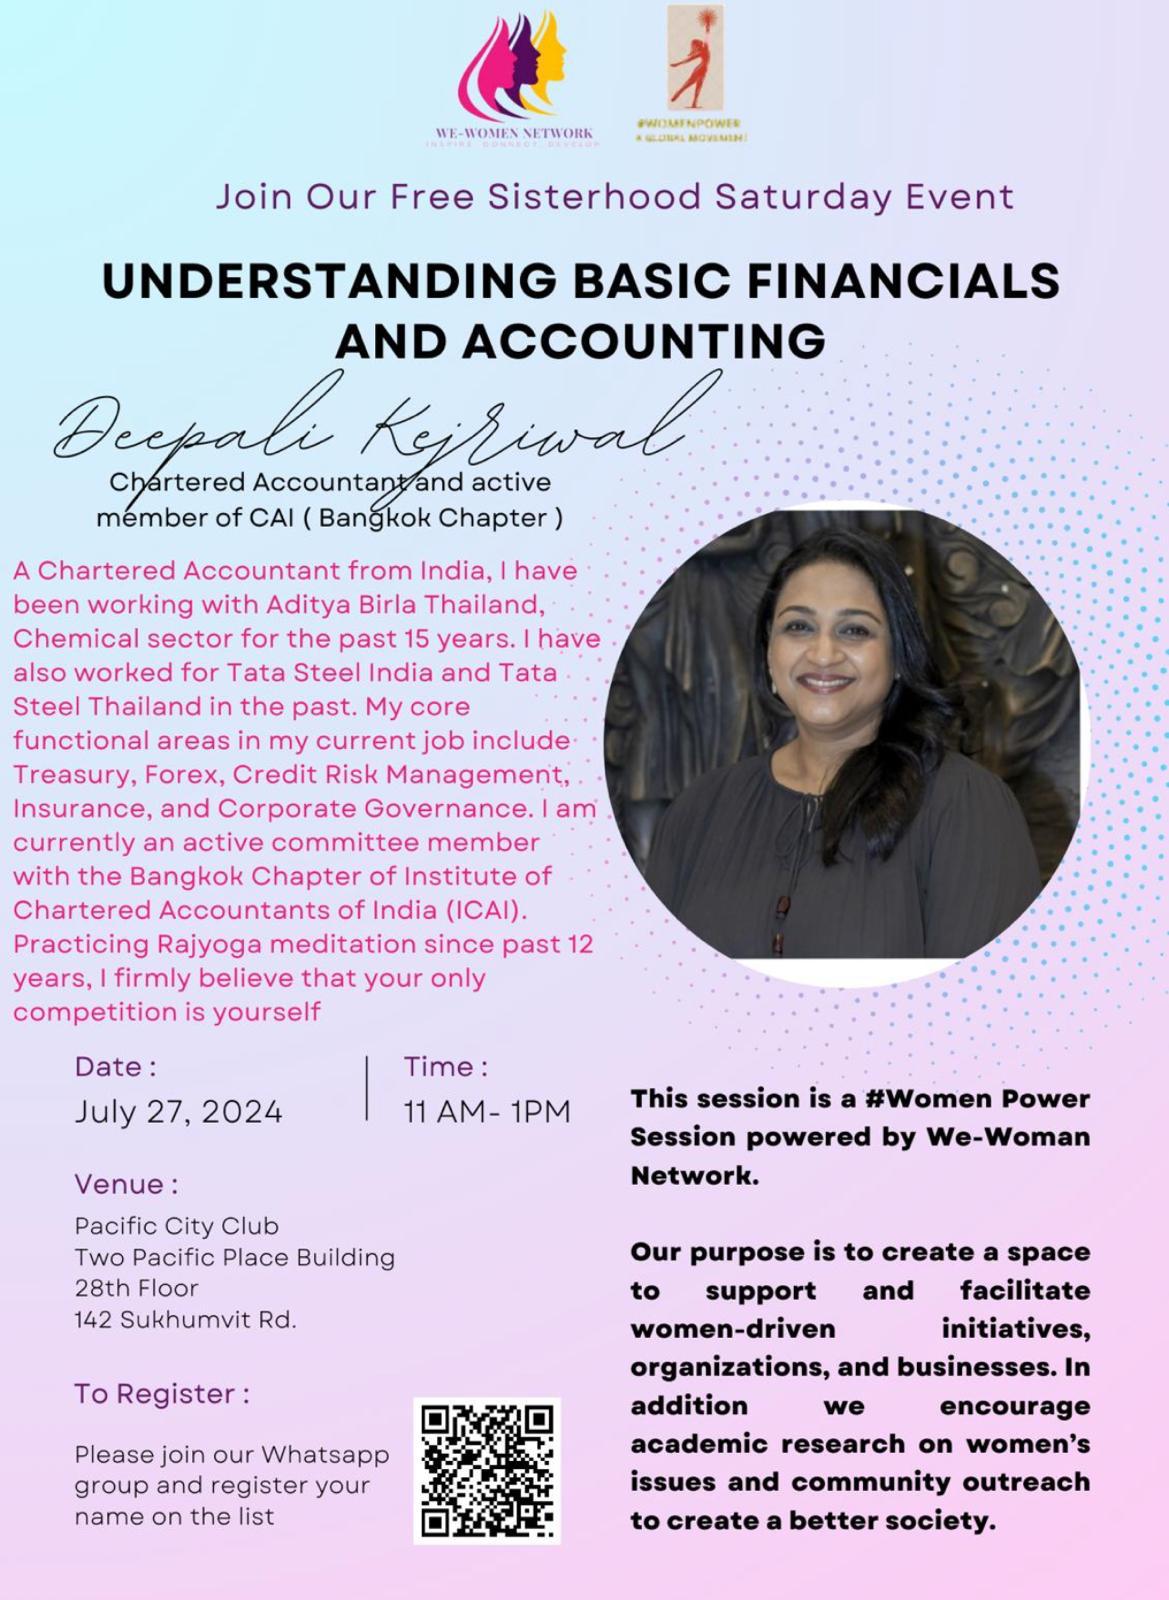 We-Women Network Community Hosts Free Monthly Knowledge Sharing Session on Accounting and Finance